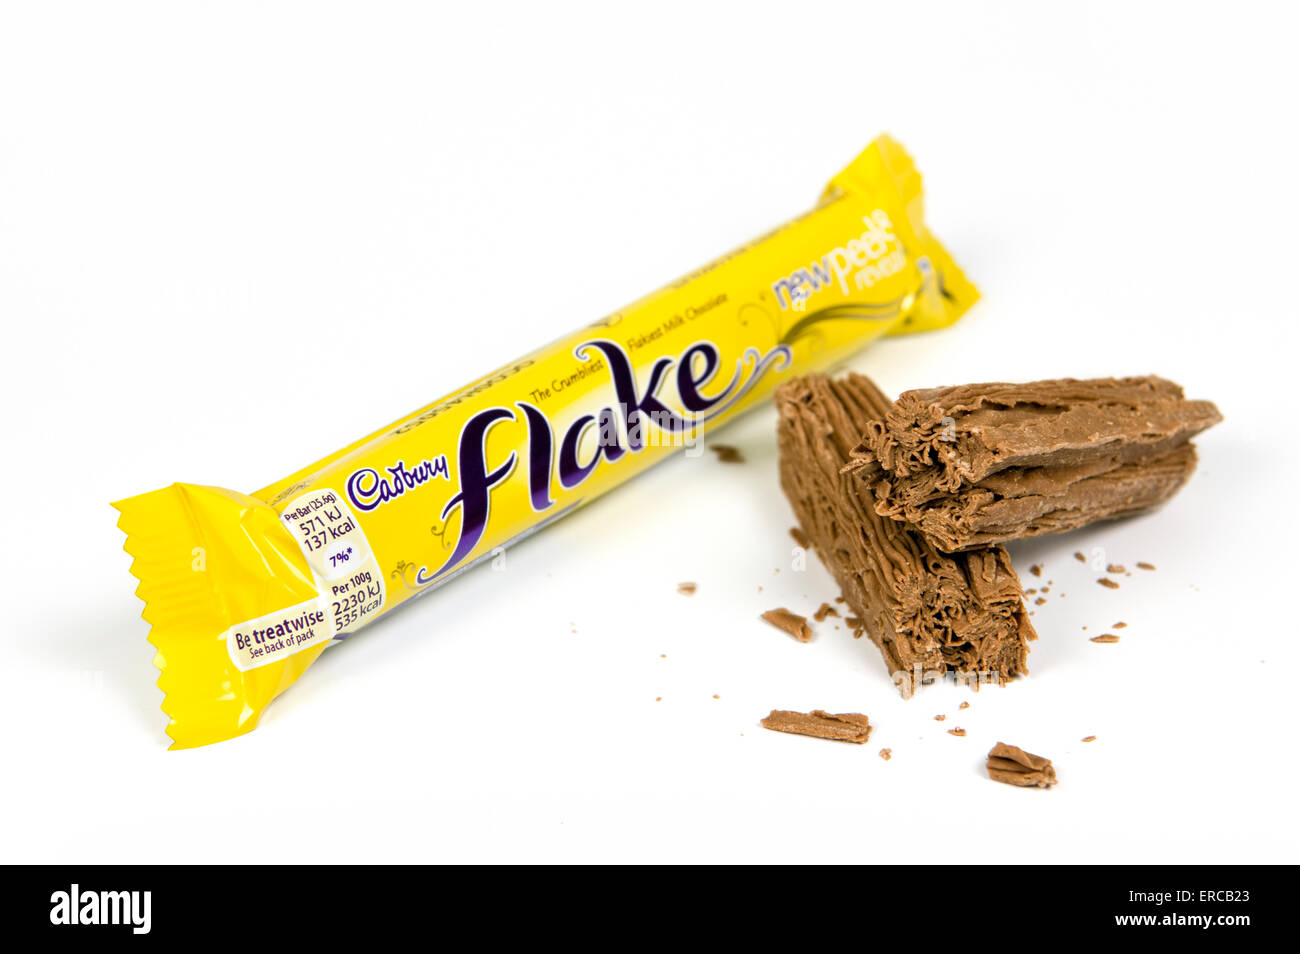 Cadbury flake chocolate bar on white background with open broken bar by the side Stock Photo